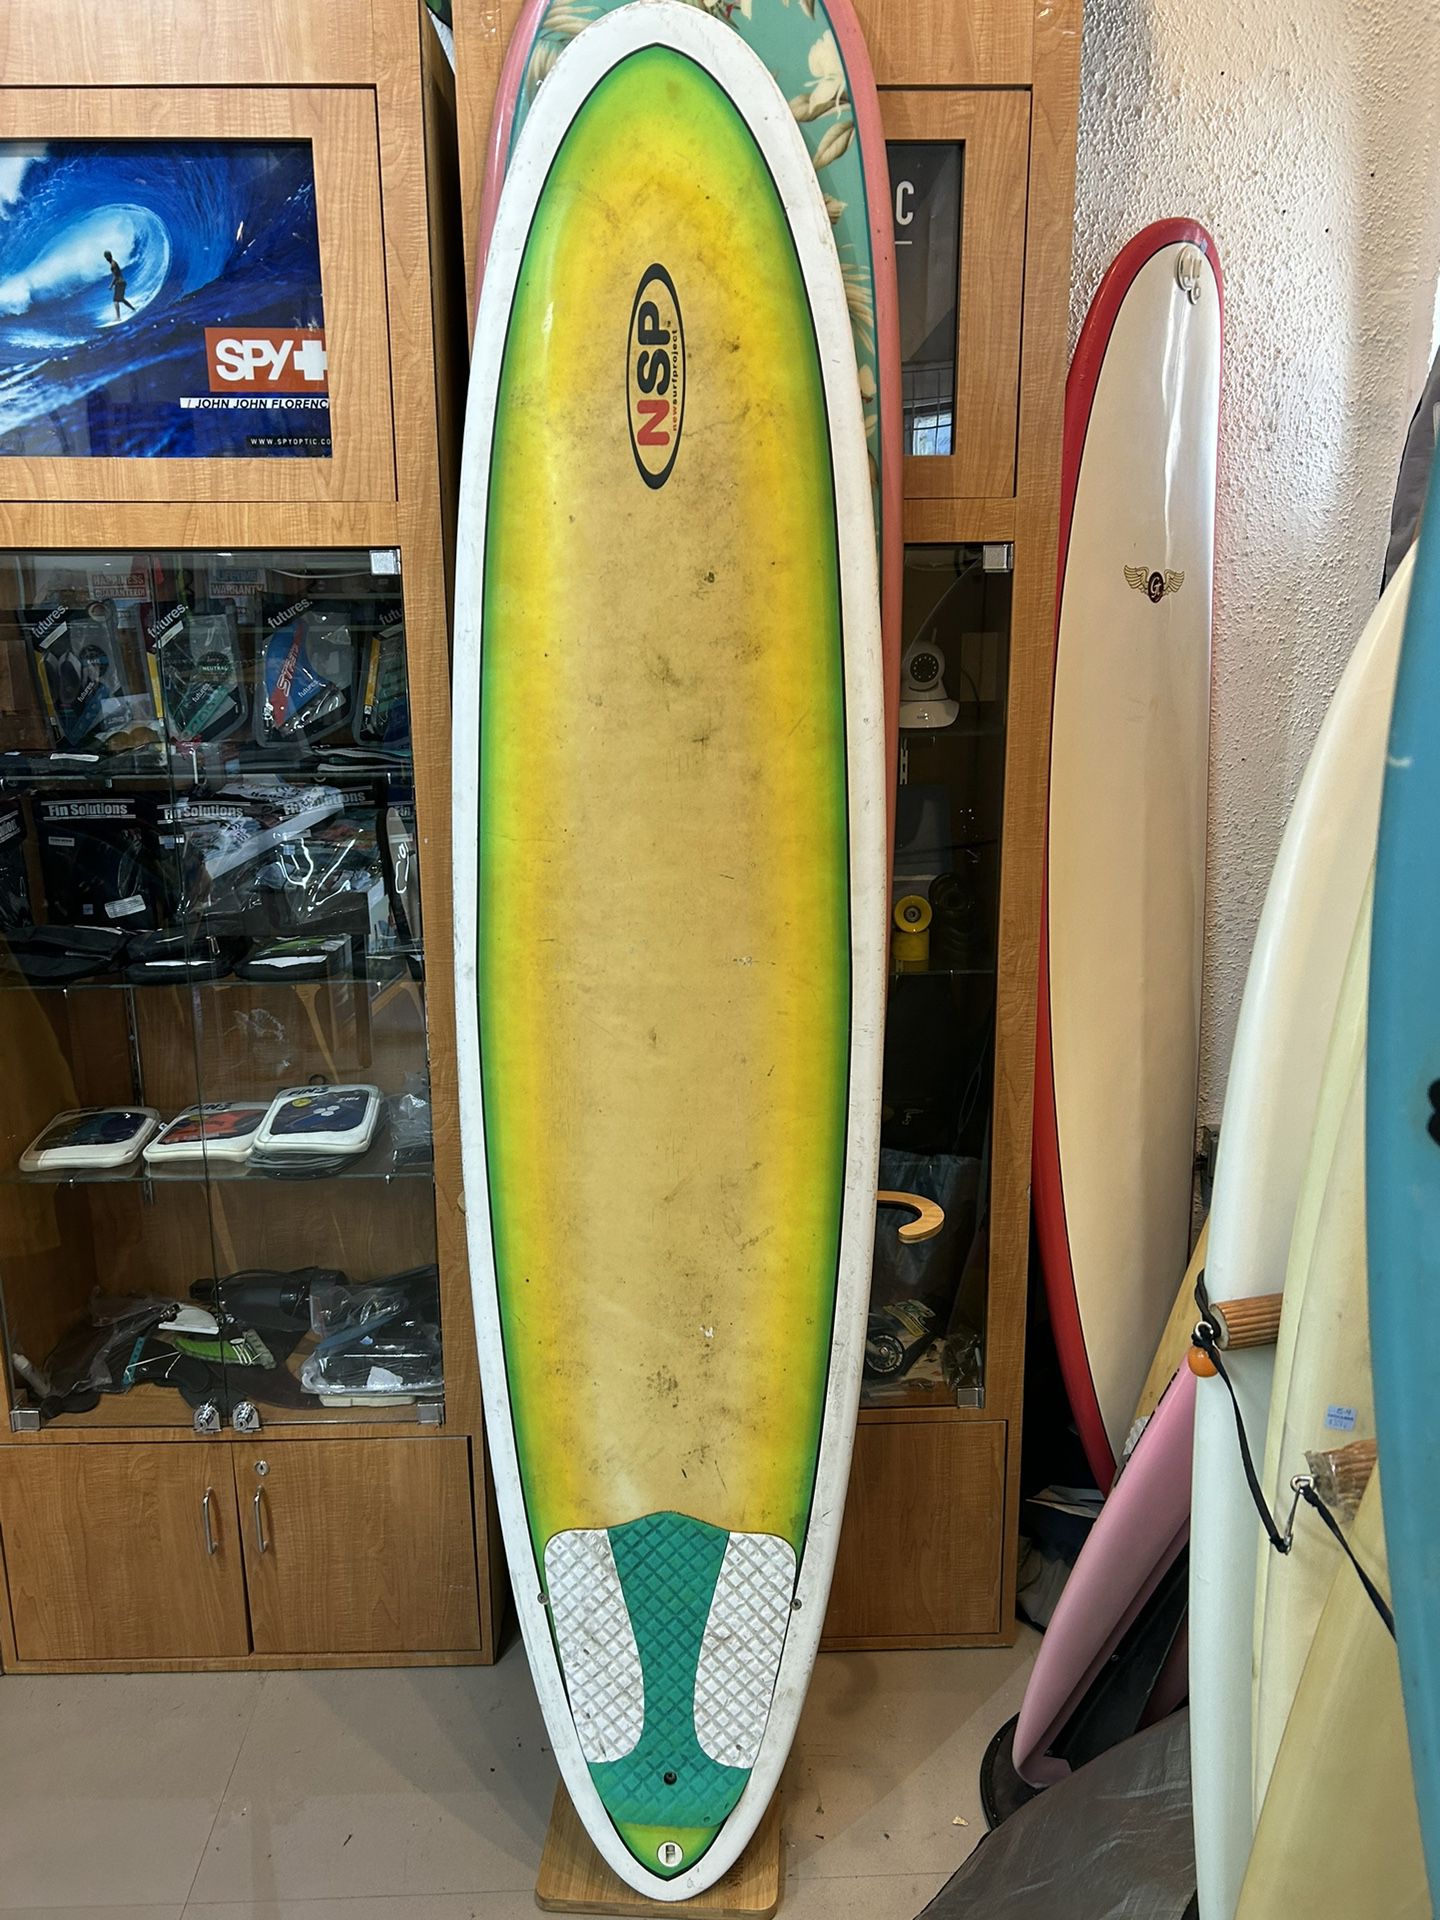 76 Nsp Surfboard, At Catch A Wave Surf Shop